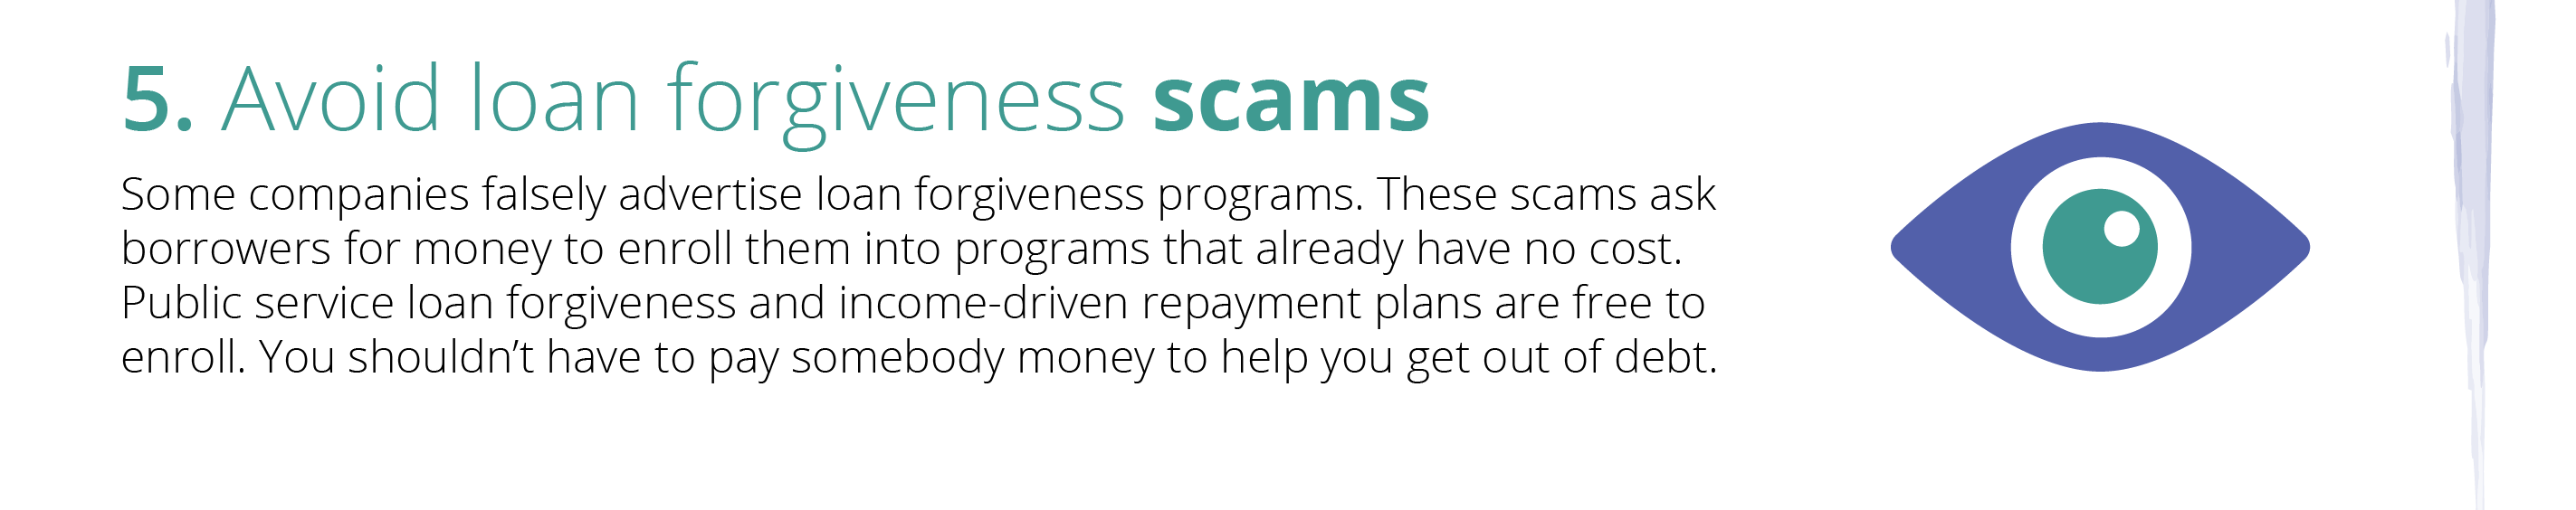 student loan payments - avoid loan forgiveness scams